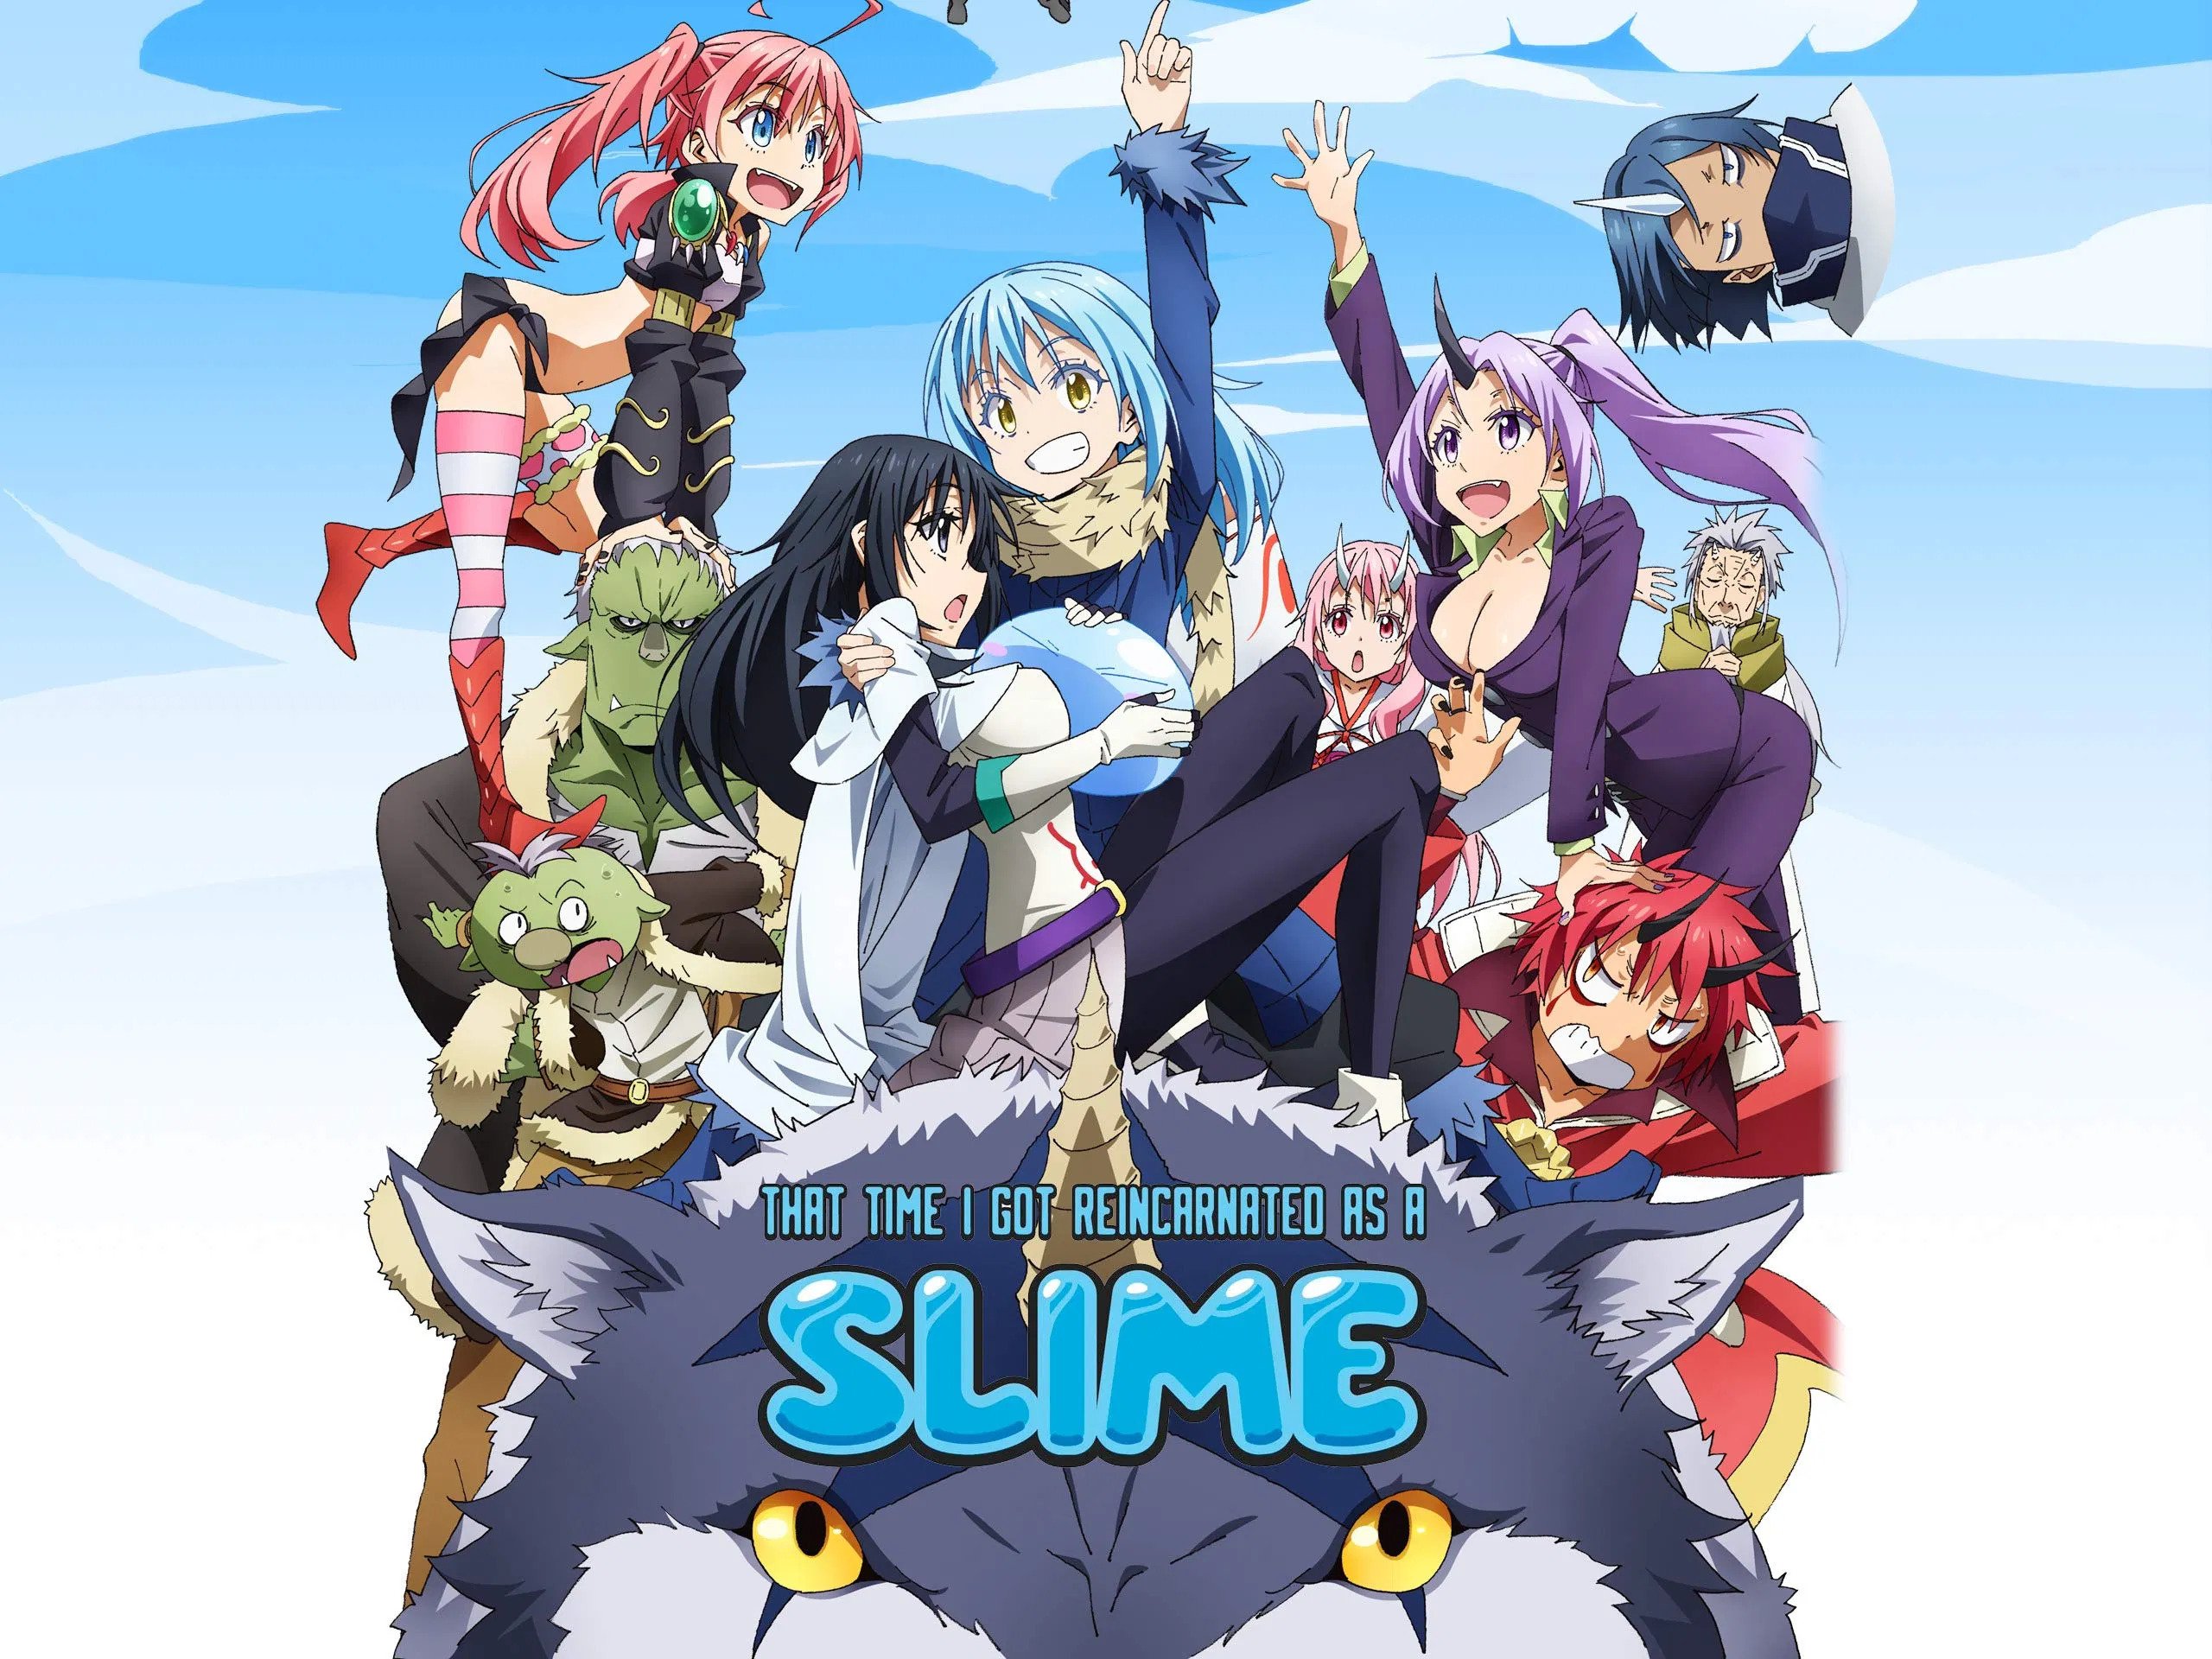 5. "That Time I Got Reincarnated as a Slime" - wide 6